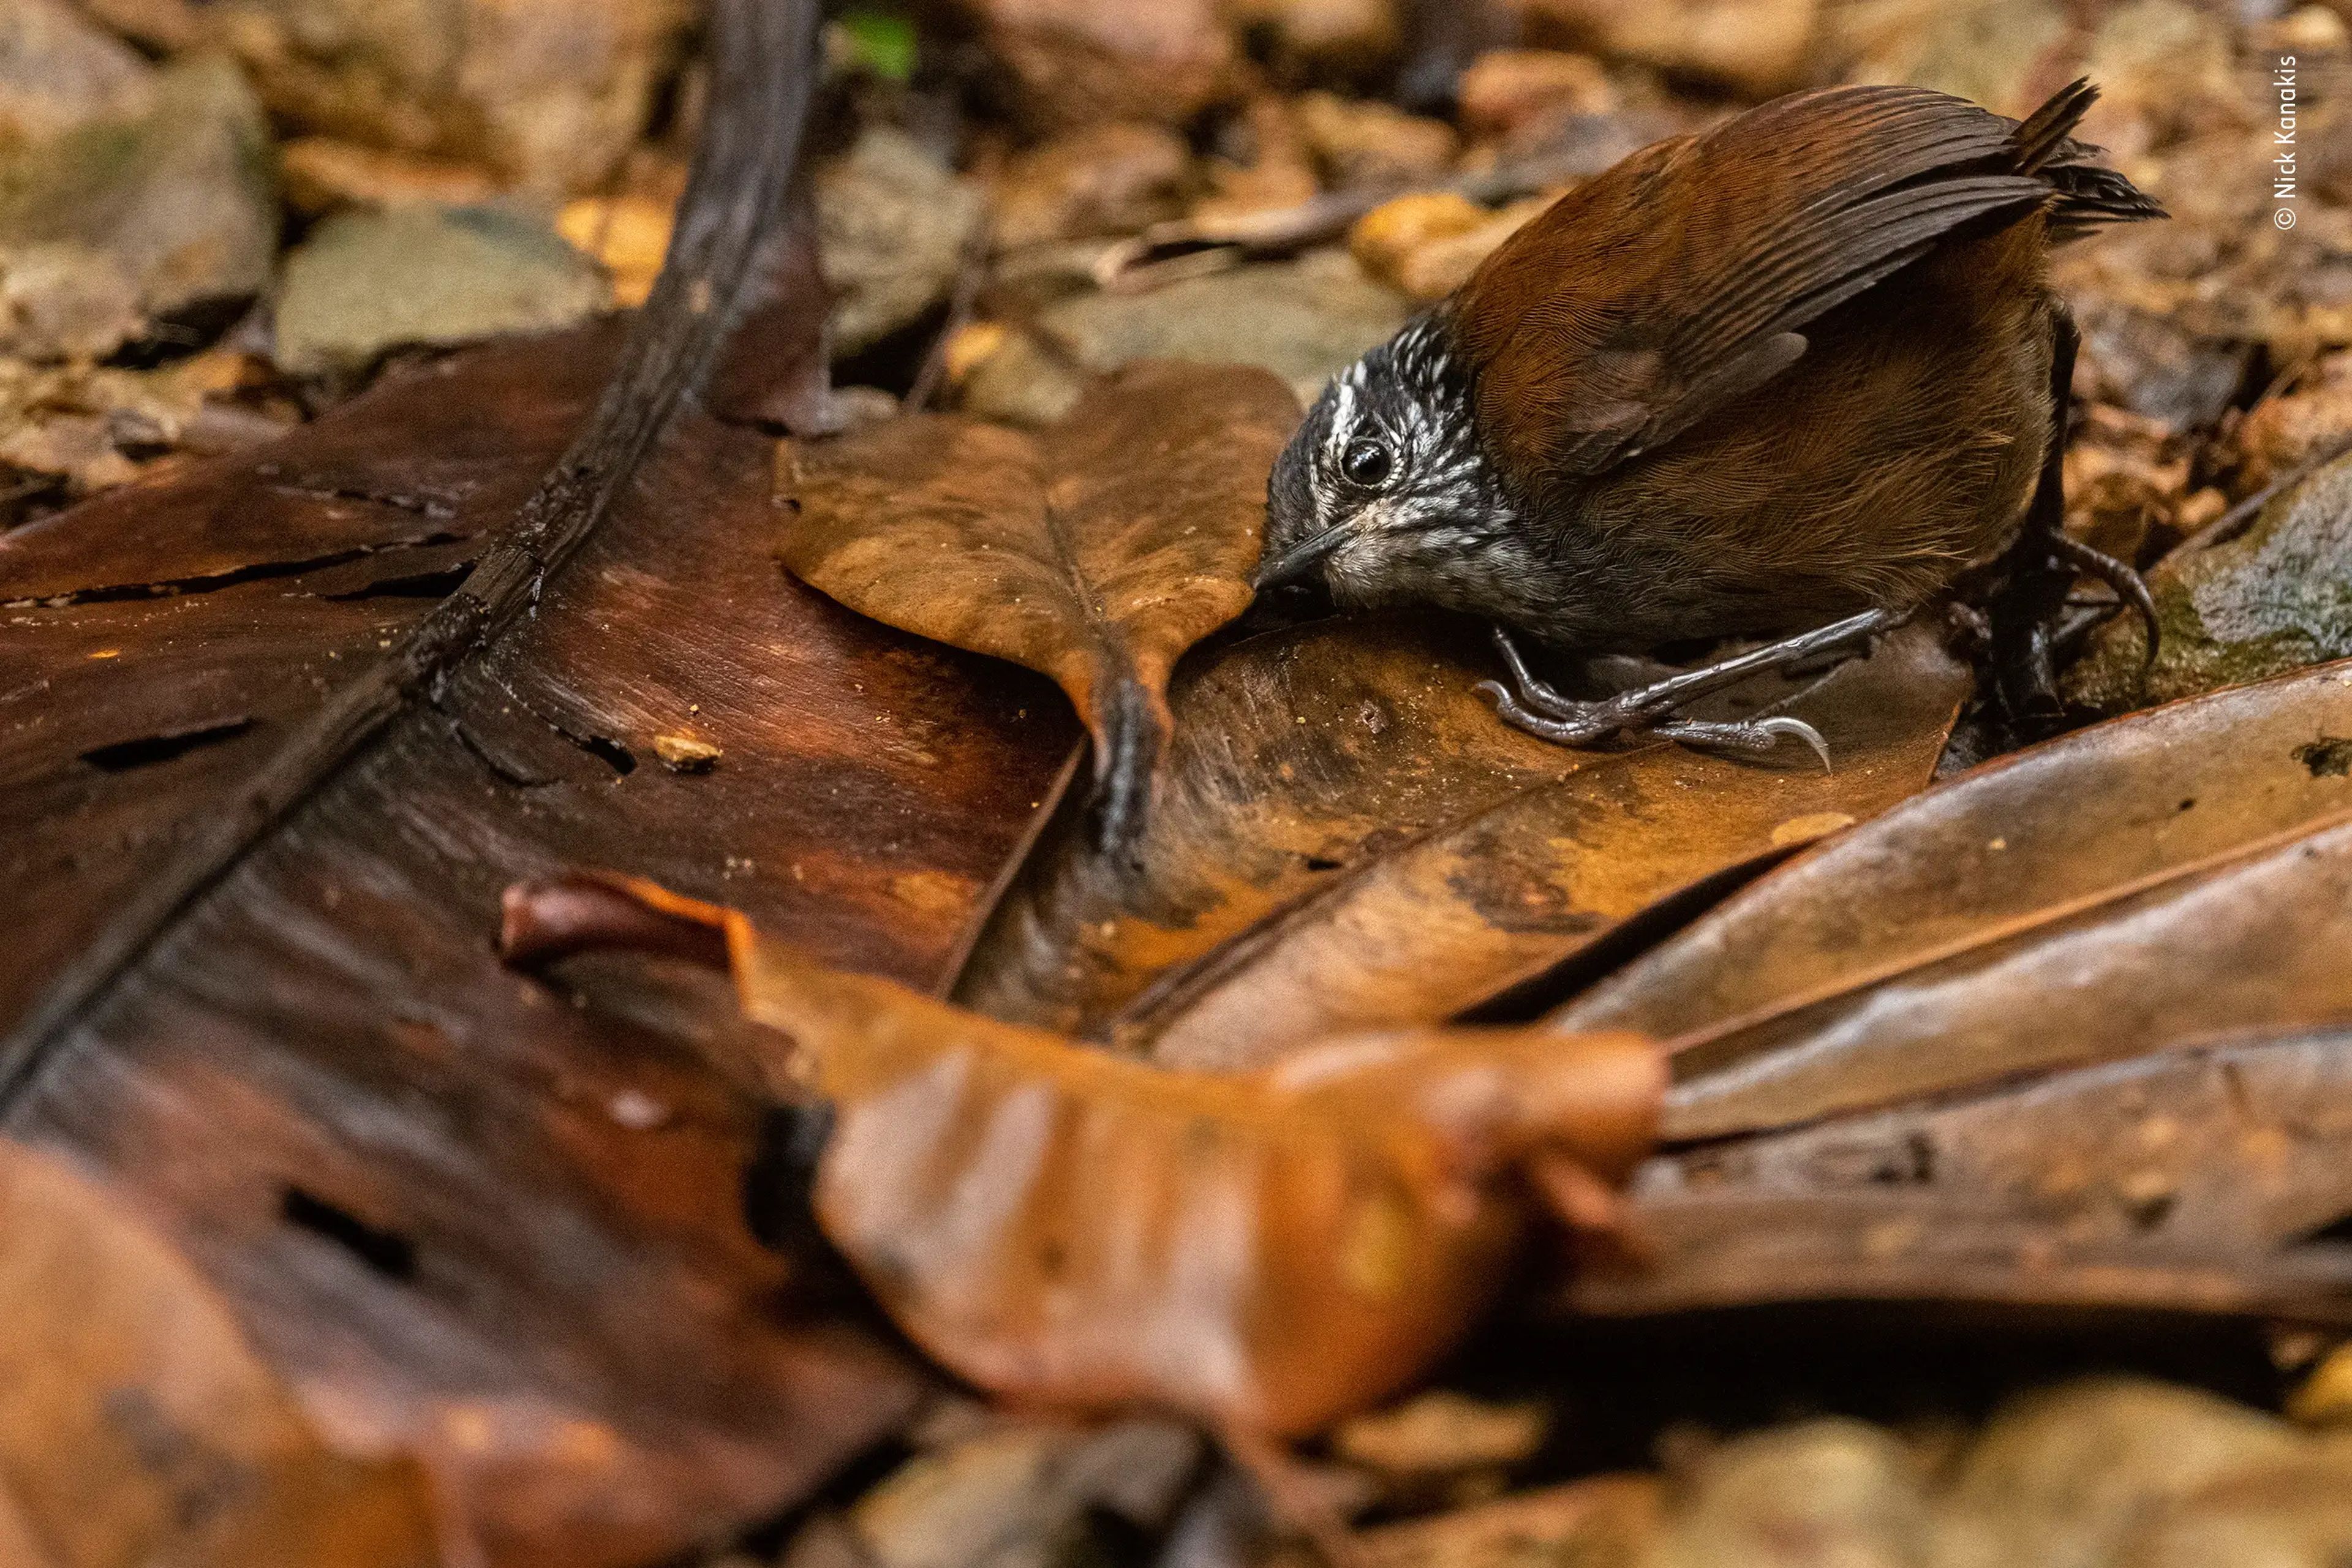 small brown bird with black and white head listens to ground in leaf pile